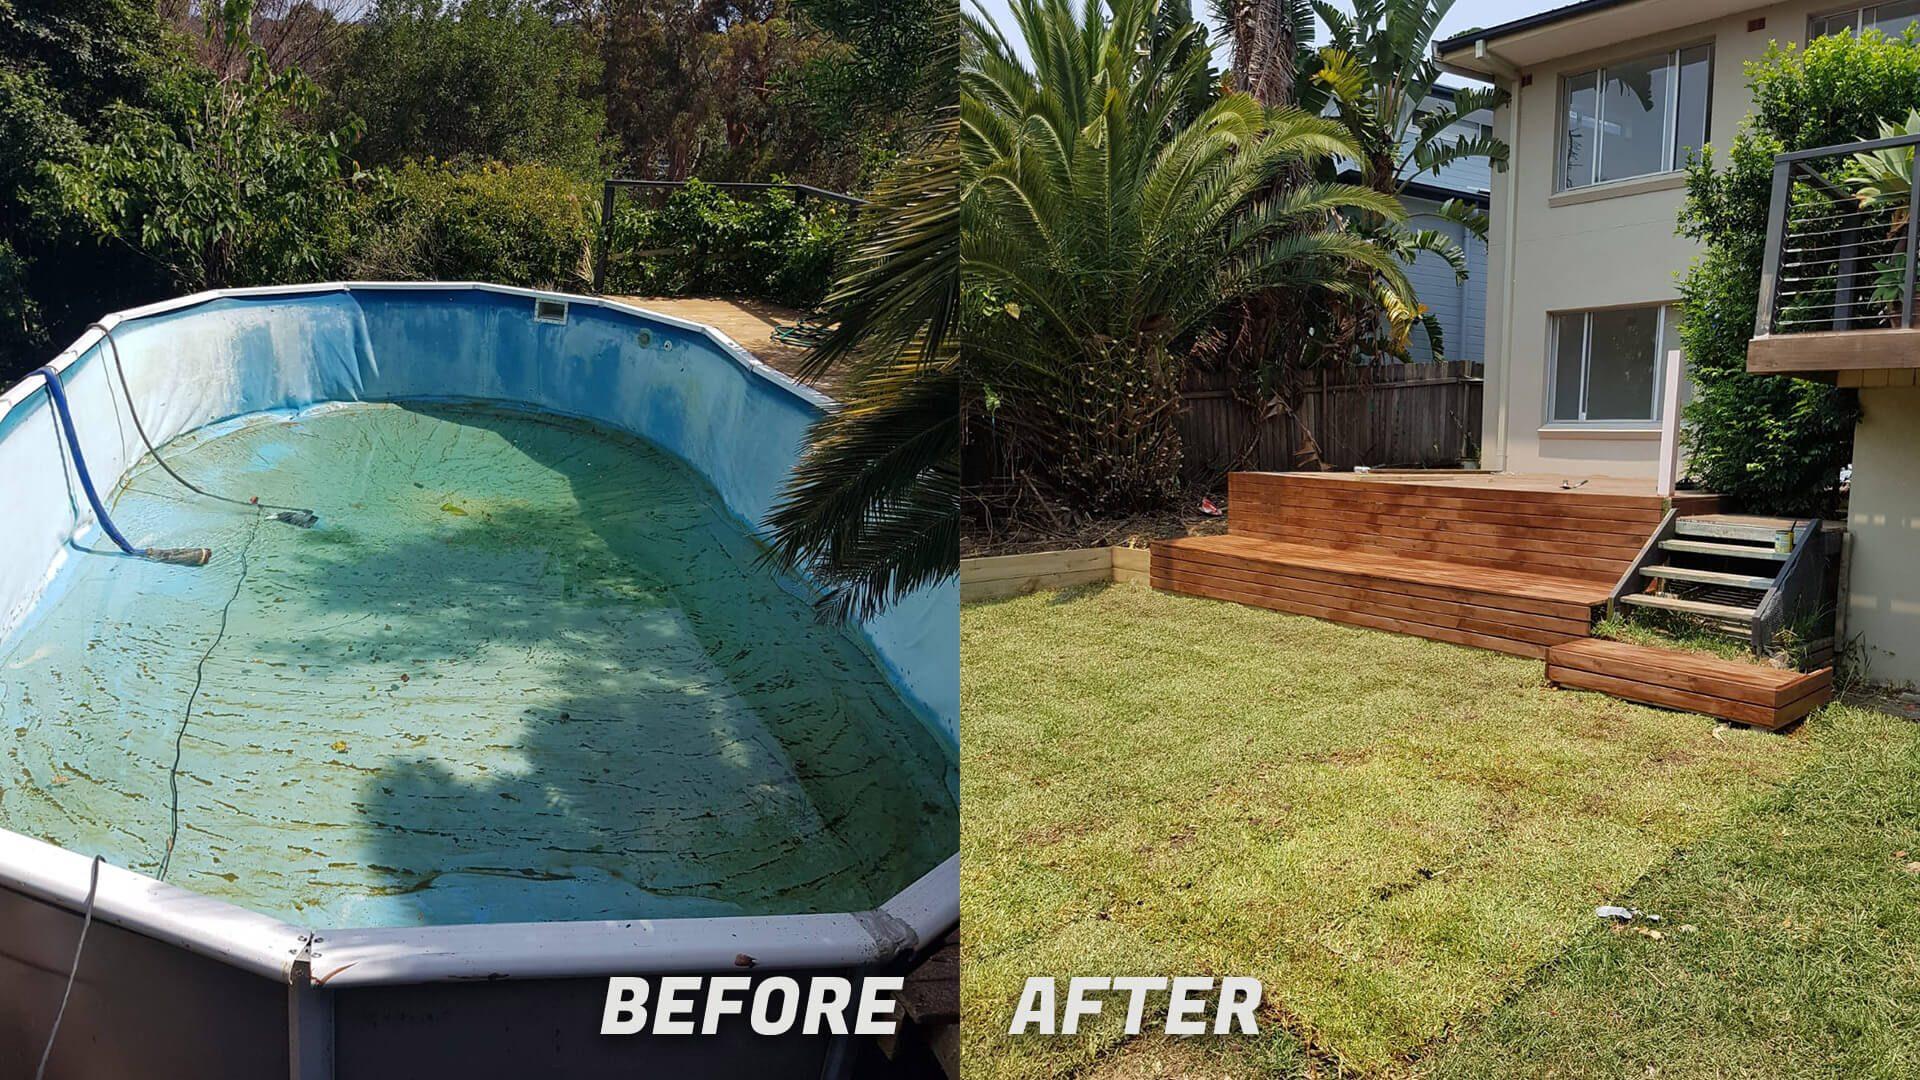 Swimming Pool Removal Demolition 0, In Ground Pool Removal Cost